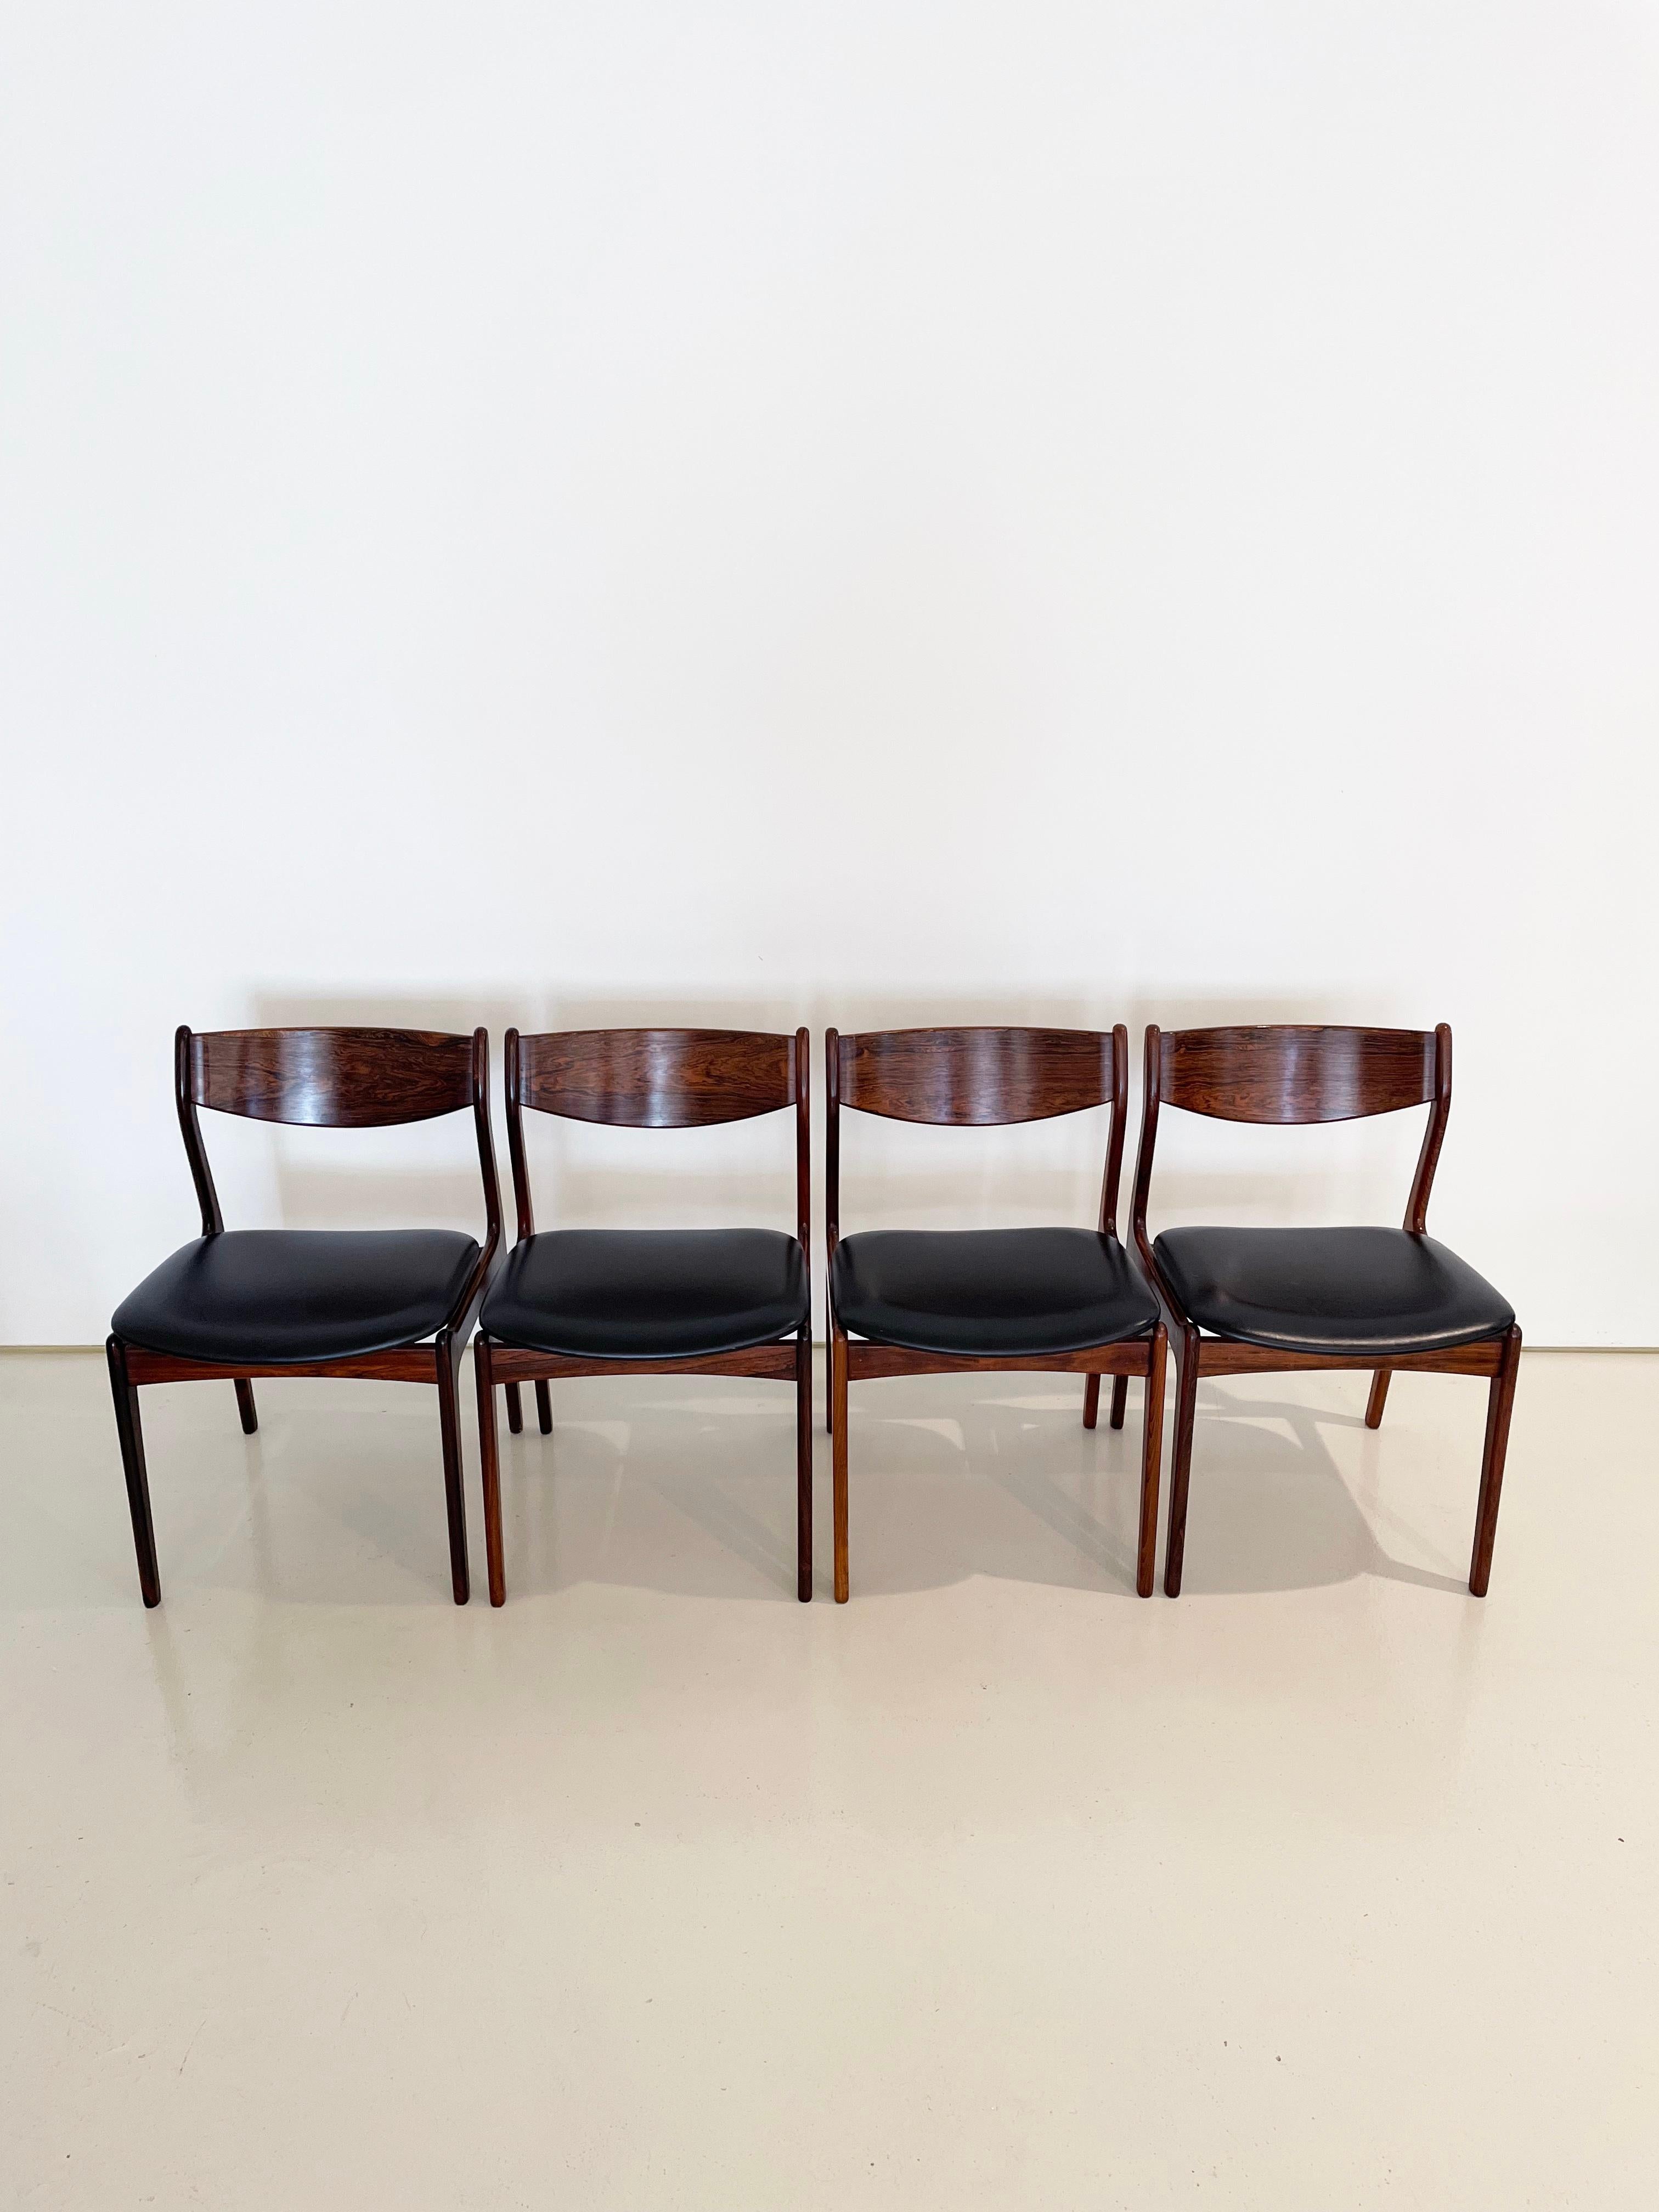 Vintage Mid-century Danish Dining Chairs, Designed by P.E. Jorgensen, Set of 8 For Sale 3